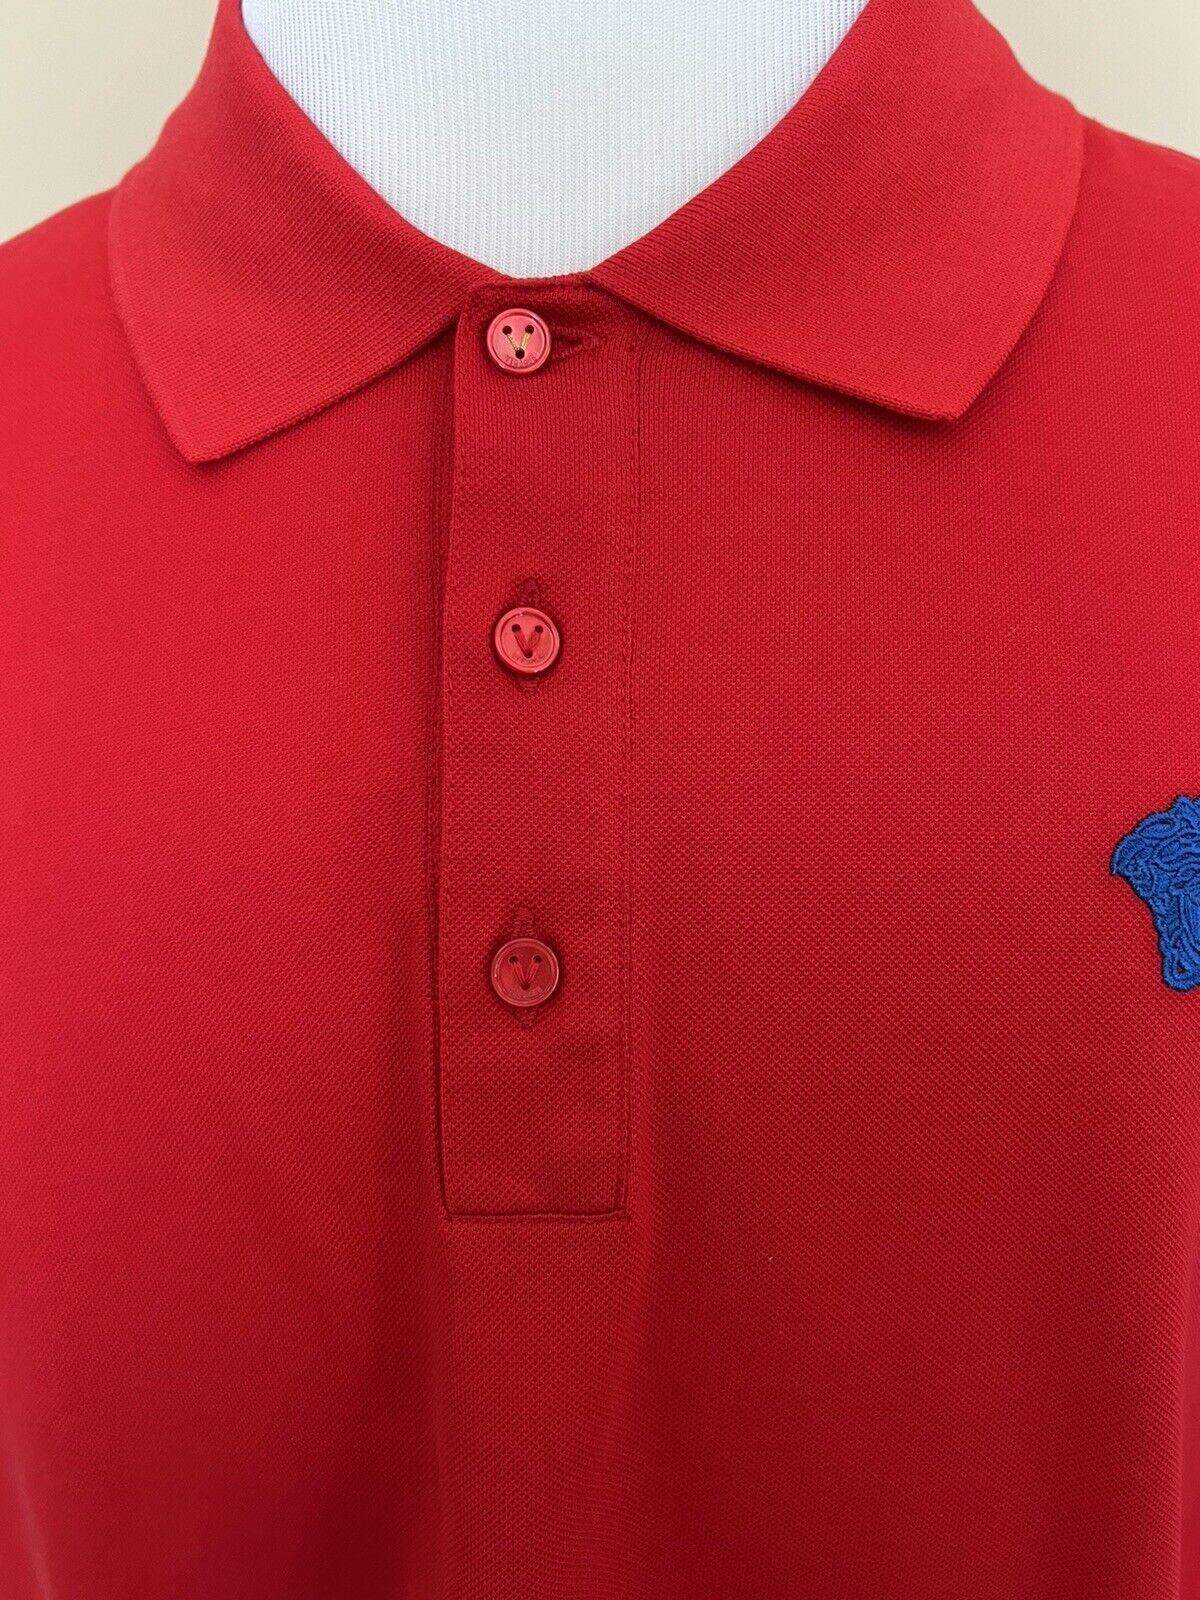 NWT $425 Versace Medusa Red Tailor Fit Cotton Polo Shirt 5XL A87427 Italy